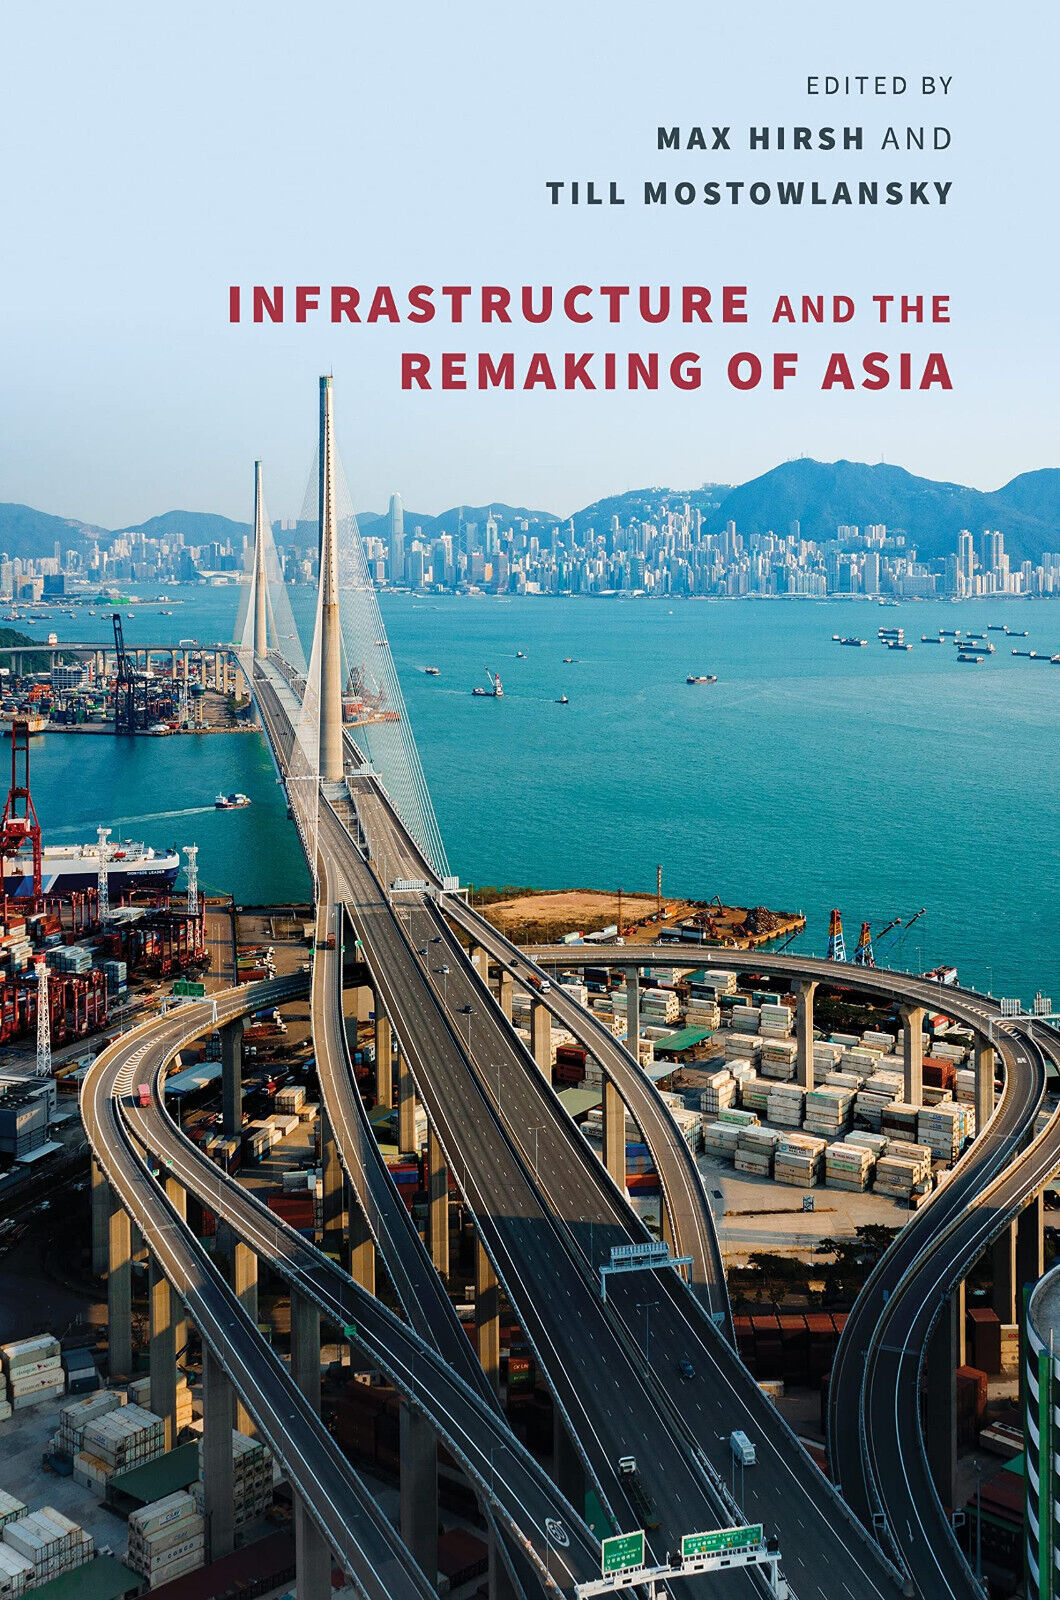 Infrastructure and the Remaking of Asia - Mia M. Bennett, Goekce Gunel - 2023